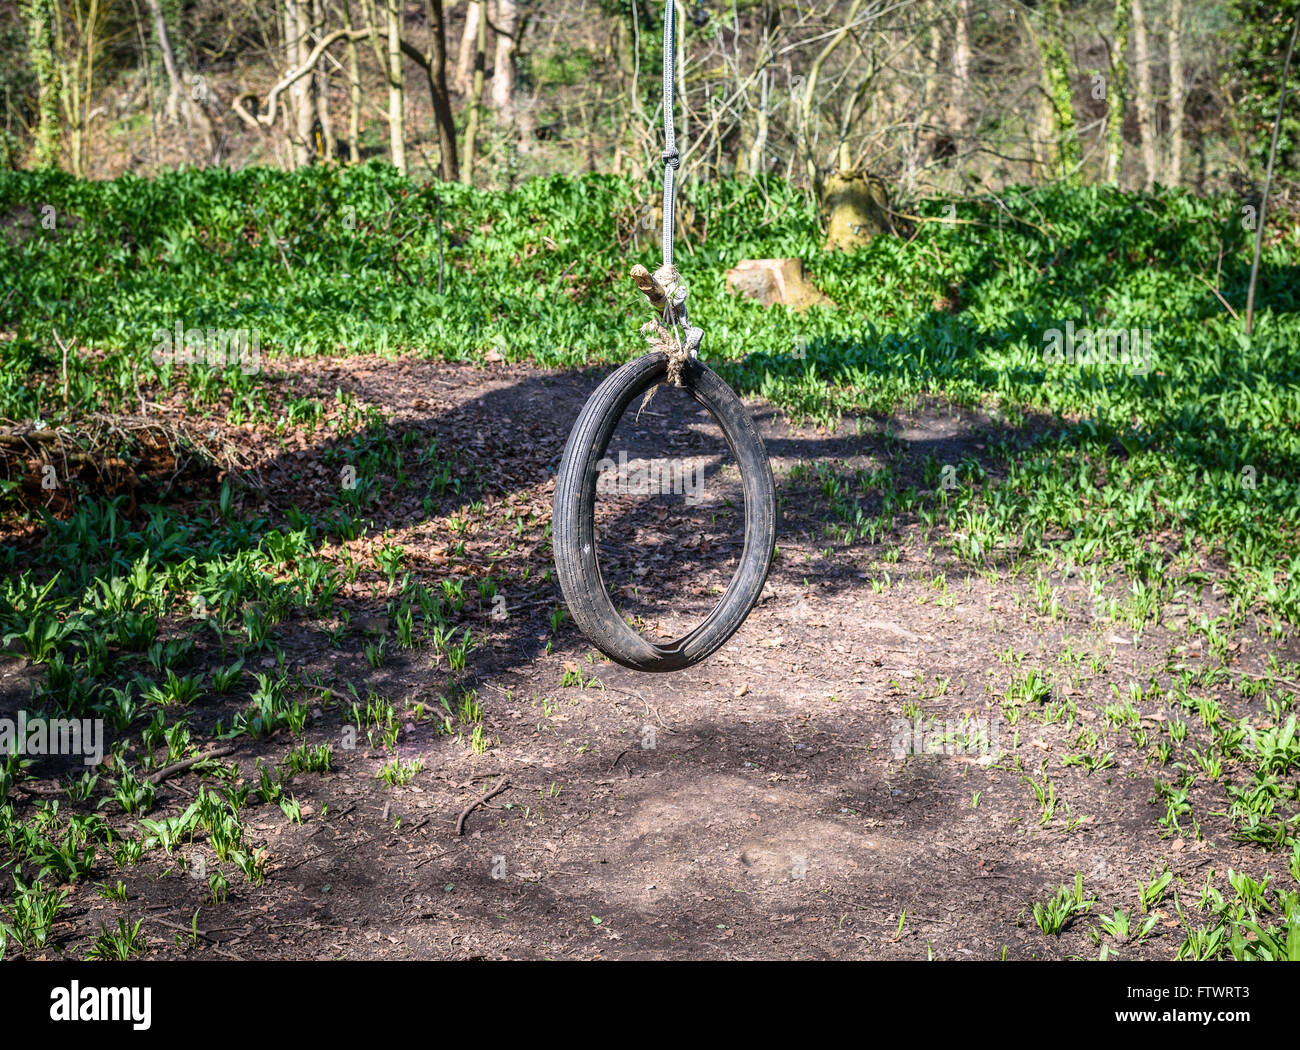 https://c8.alamy.com/comp/FTWRT3/an-old-tyre-swing-hanging-from-a-tree-in-woodland-FTWRT3.jpg